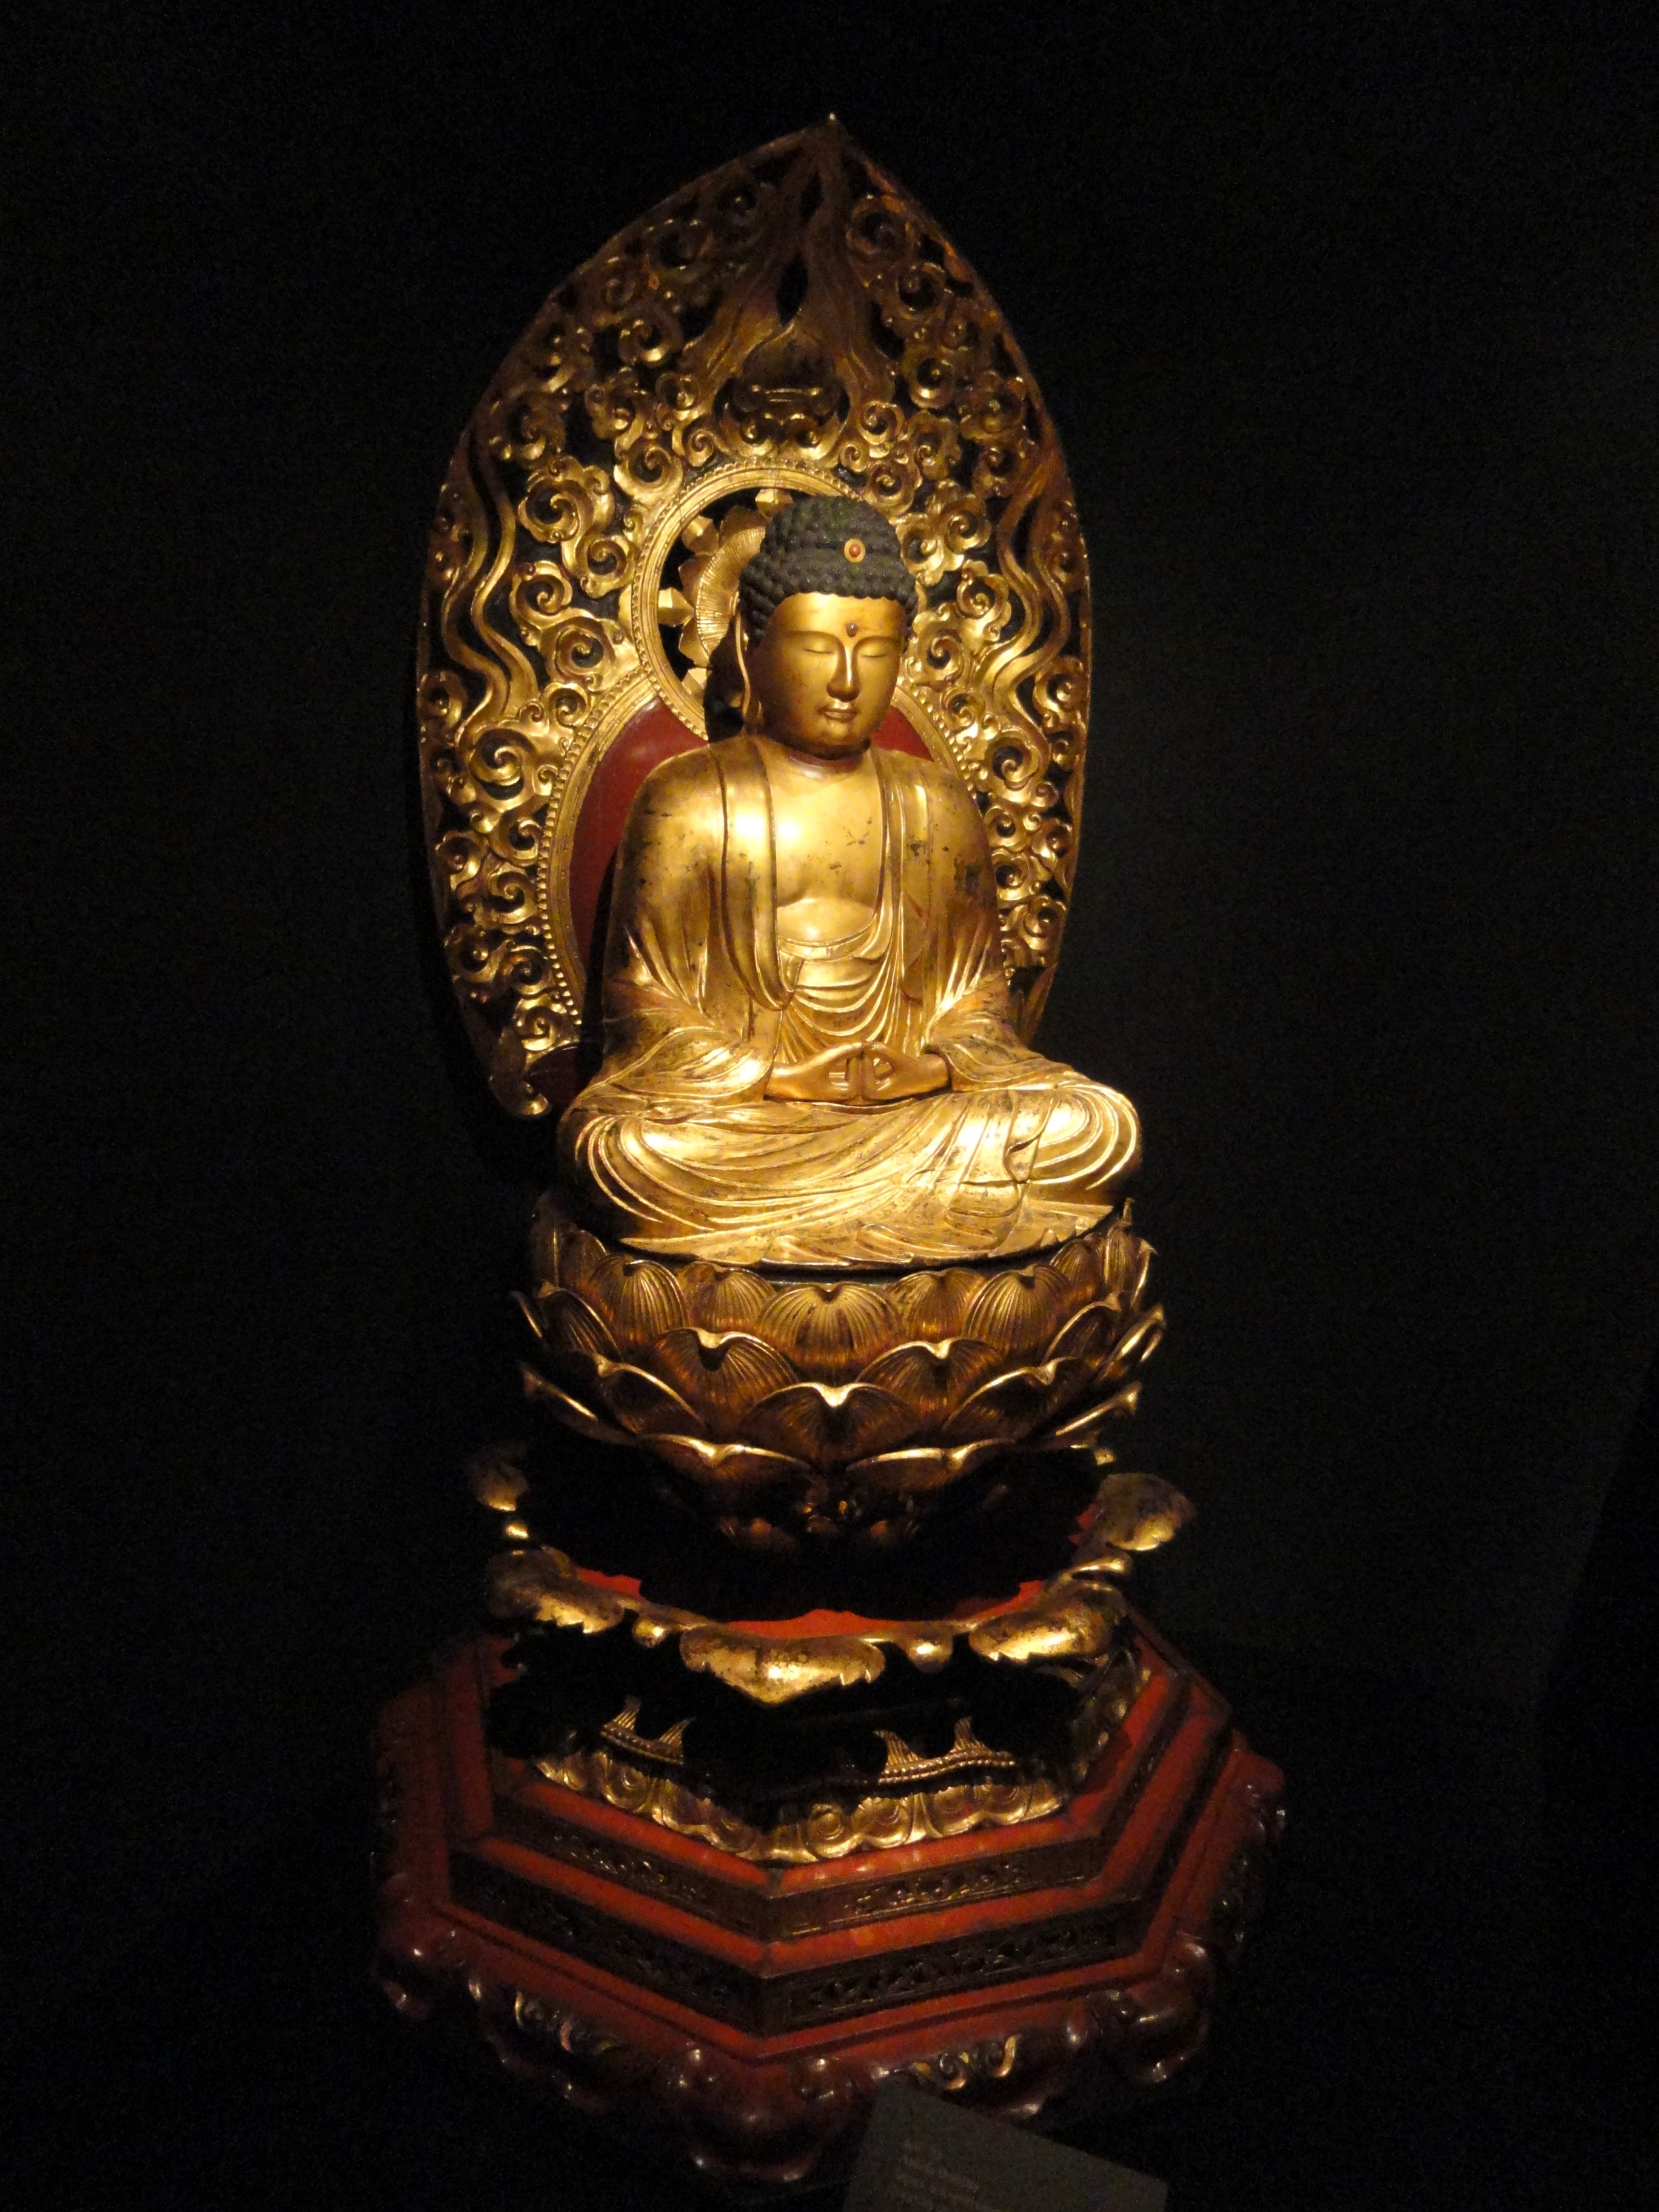 Golden Buddha Statue In Japan Free Image Download